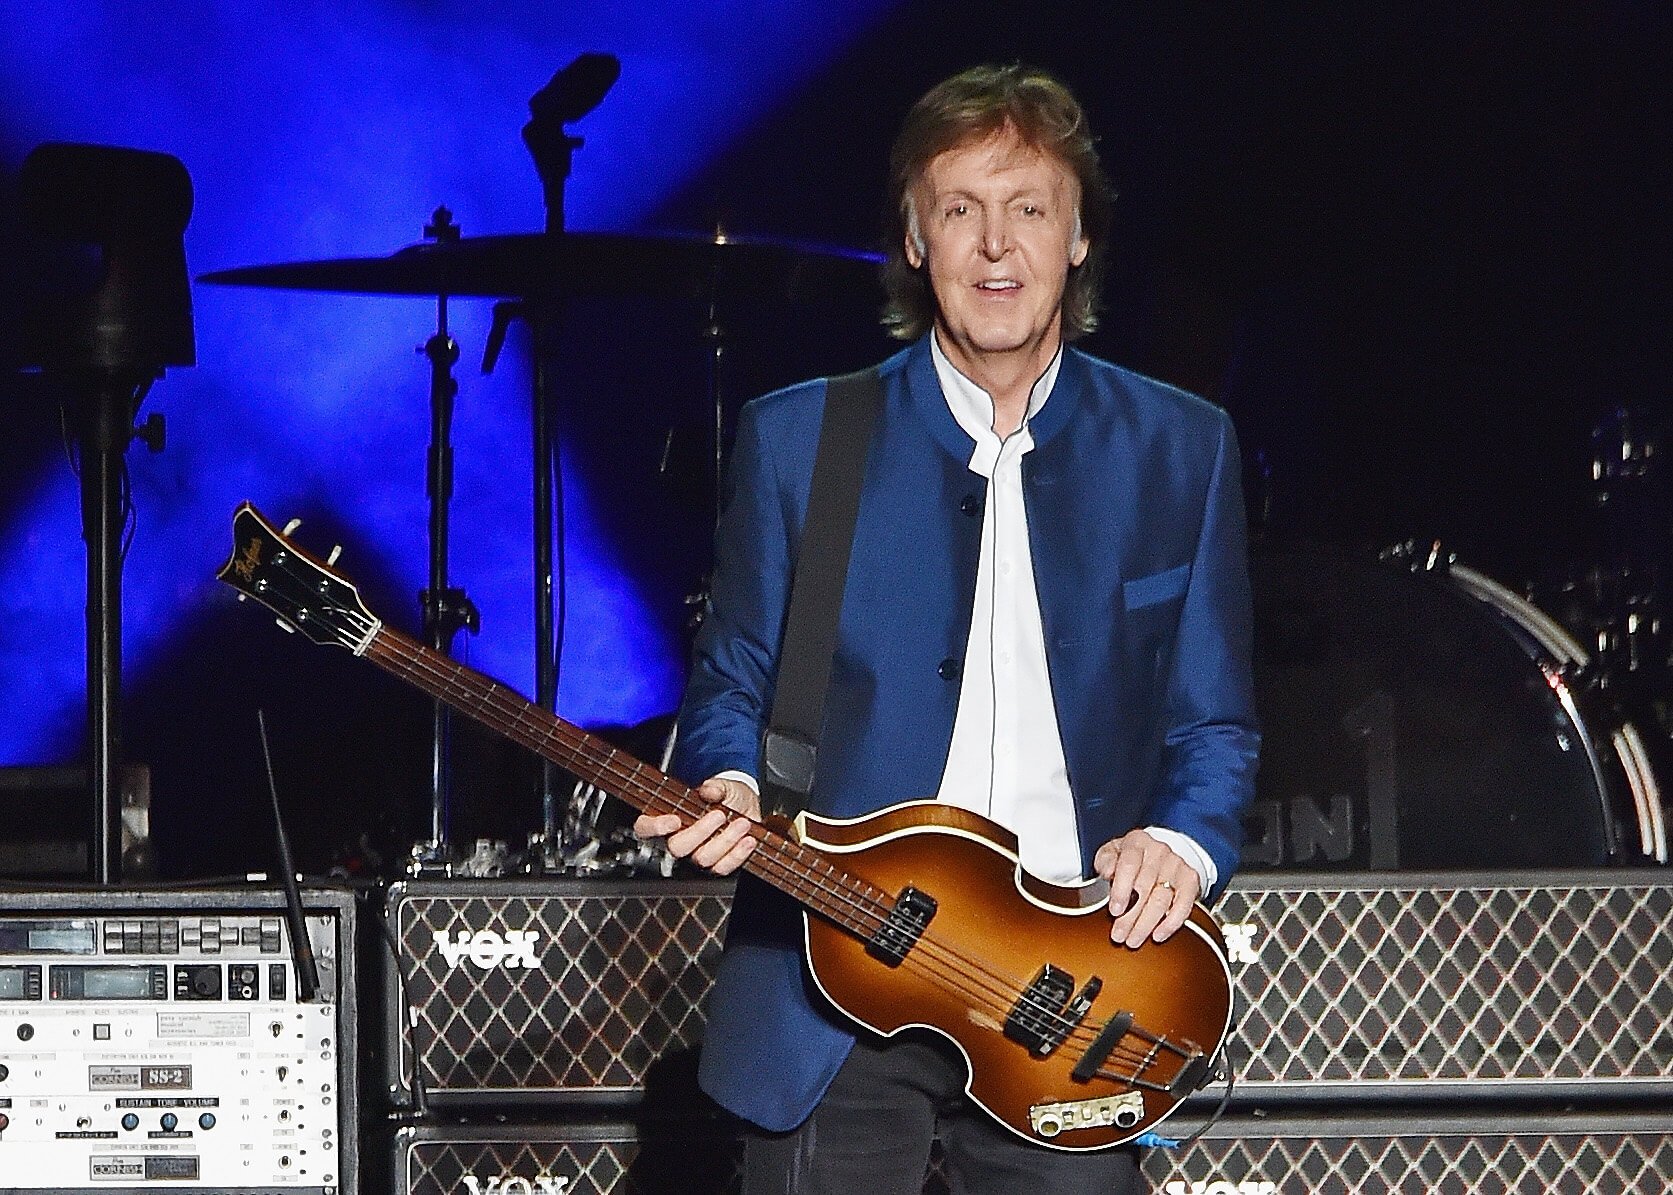 Paul McCartney, writer of The Beatles' "When I'm Sixty-Four," with a guitar